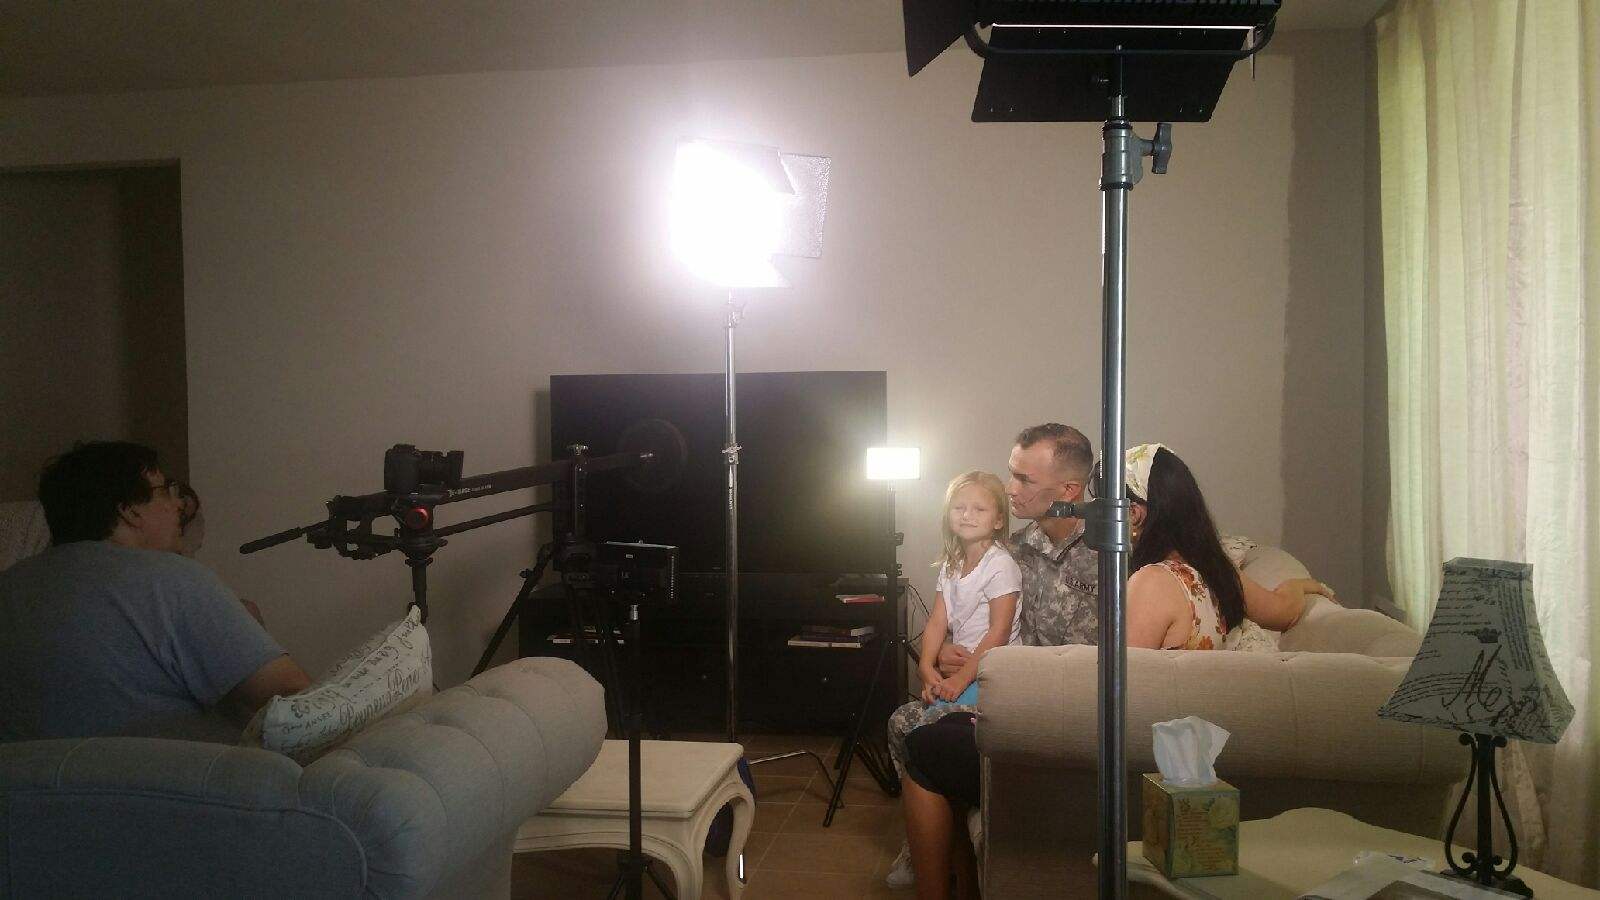 Director Michael D. Walters with Amberlyn Matthews, Josh Quijas and Melinda Quijas setting up a scene for Kiss Away My Ghosts